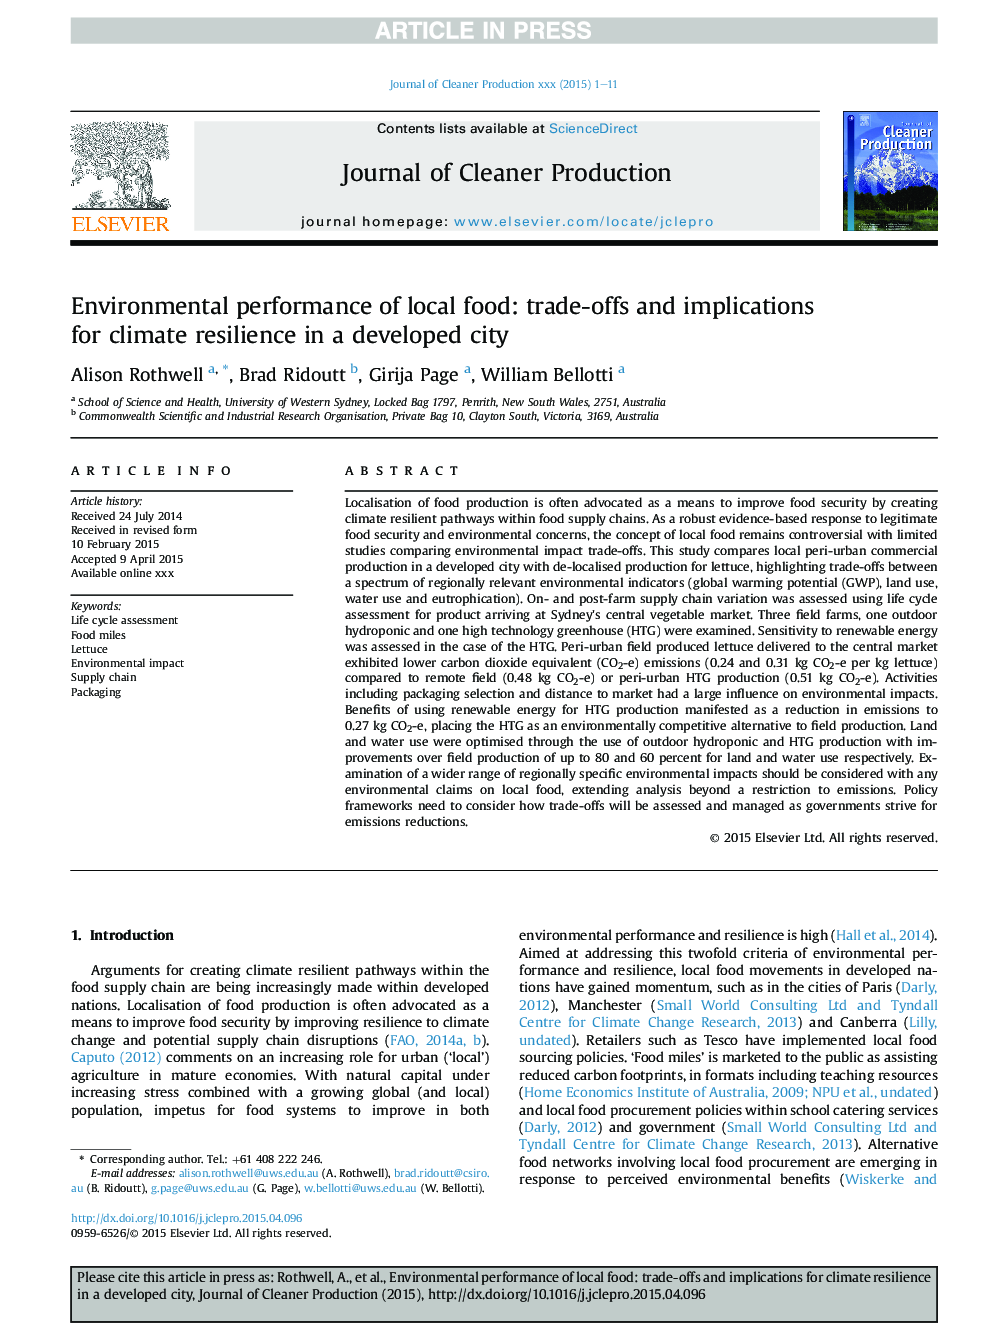 Environmental performance of local food: trade-offs and implications for climate resilience in a developed city